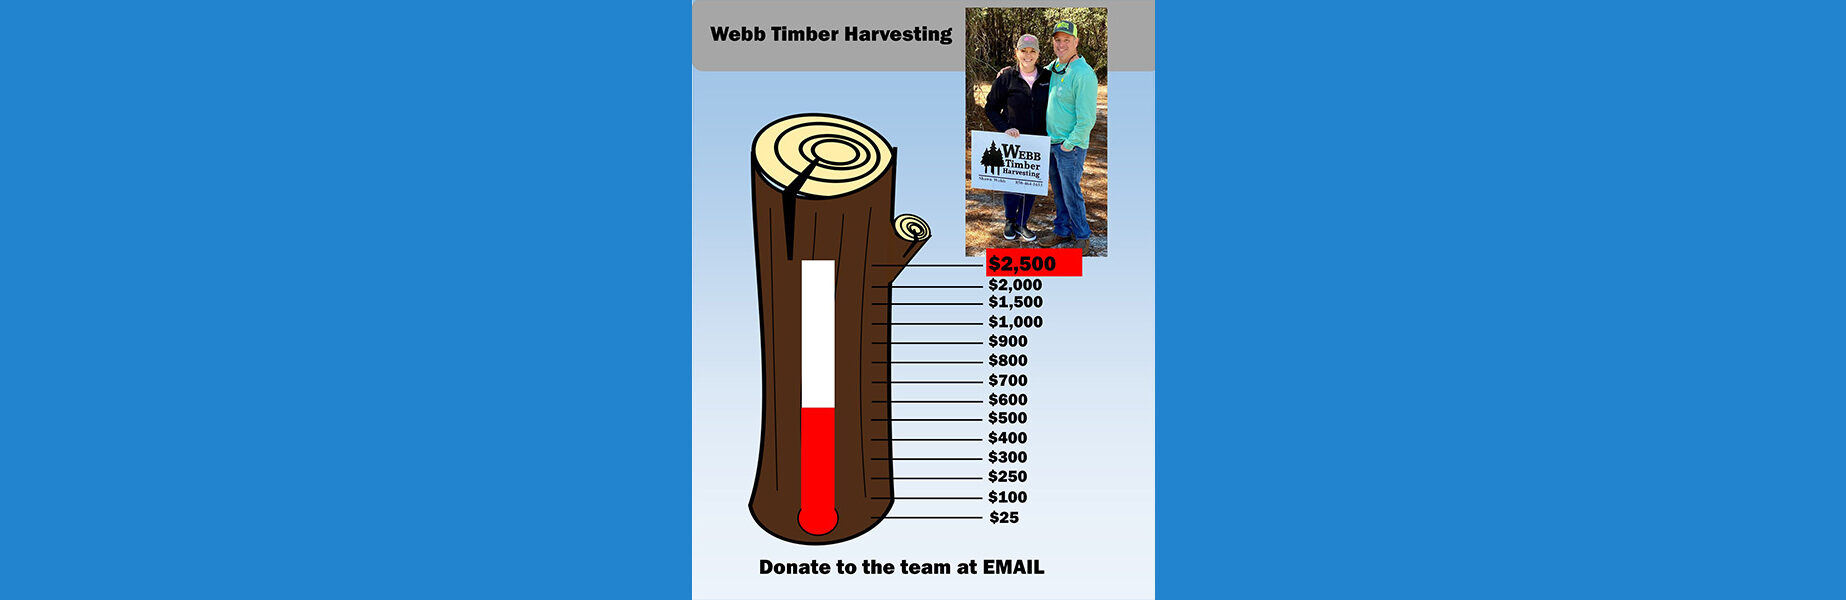 DWTL WEBB TIMBER Thermometer